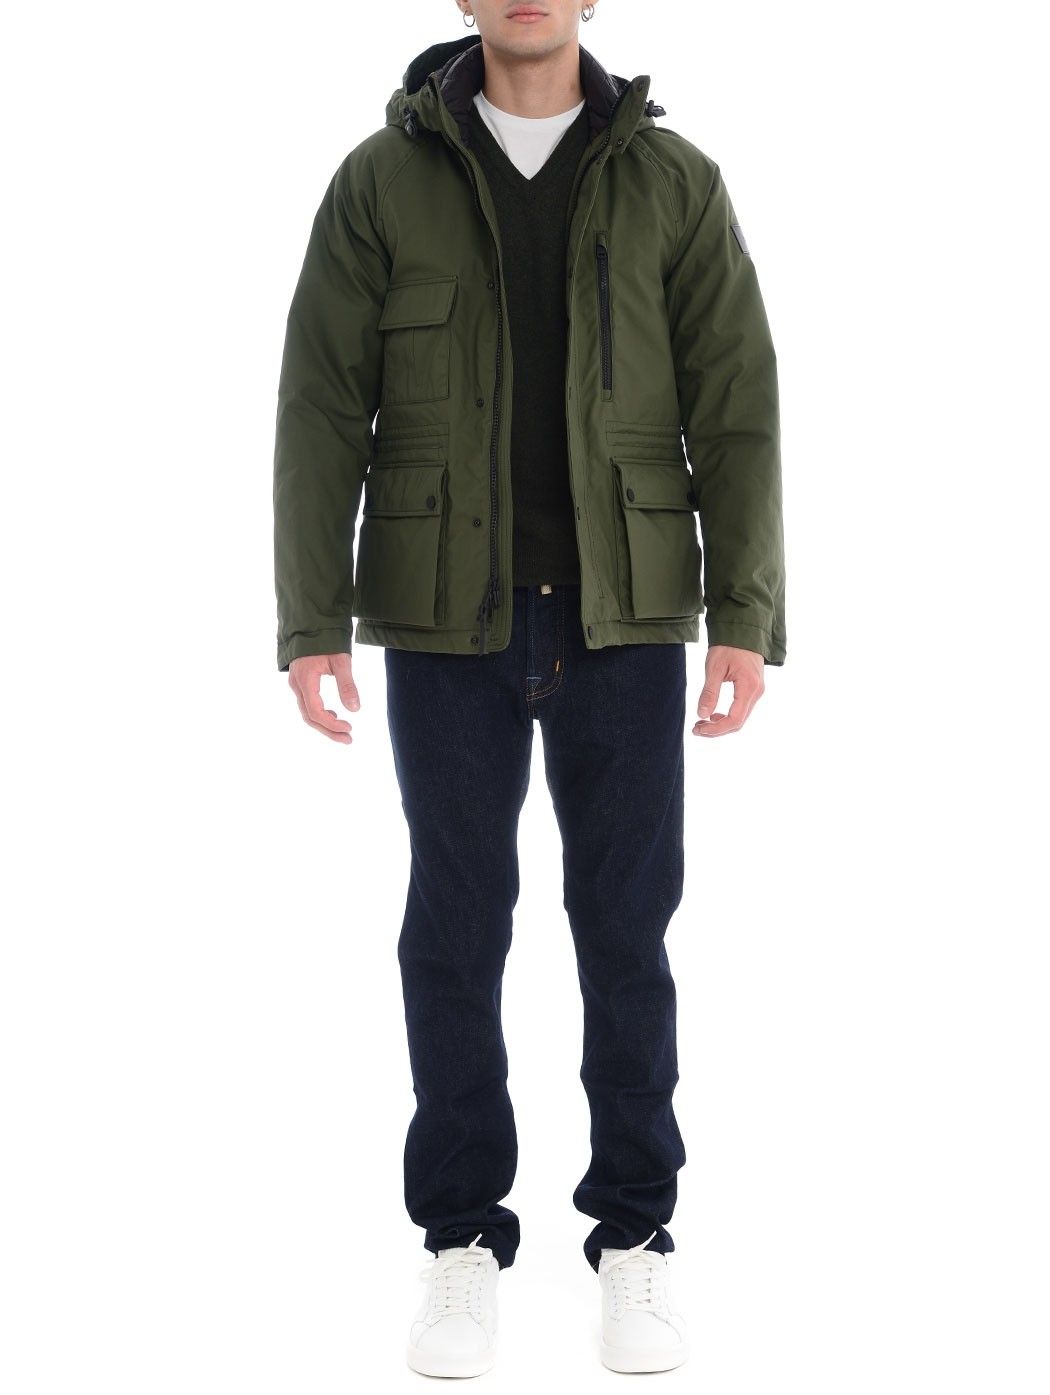  MAN COLLECTION,FALL WINTER,CHURCH'S,MONCLER,MONCLER GRENOBLE,HERNO,WOOLRICH,MSGM,NEIL BARRETT,STONE ISLAND,BLUNDSTONE  WOOLRICH WOOU0466MR